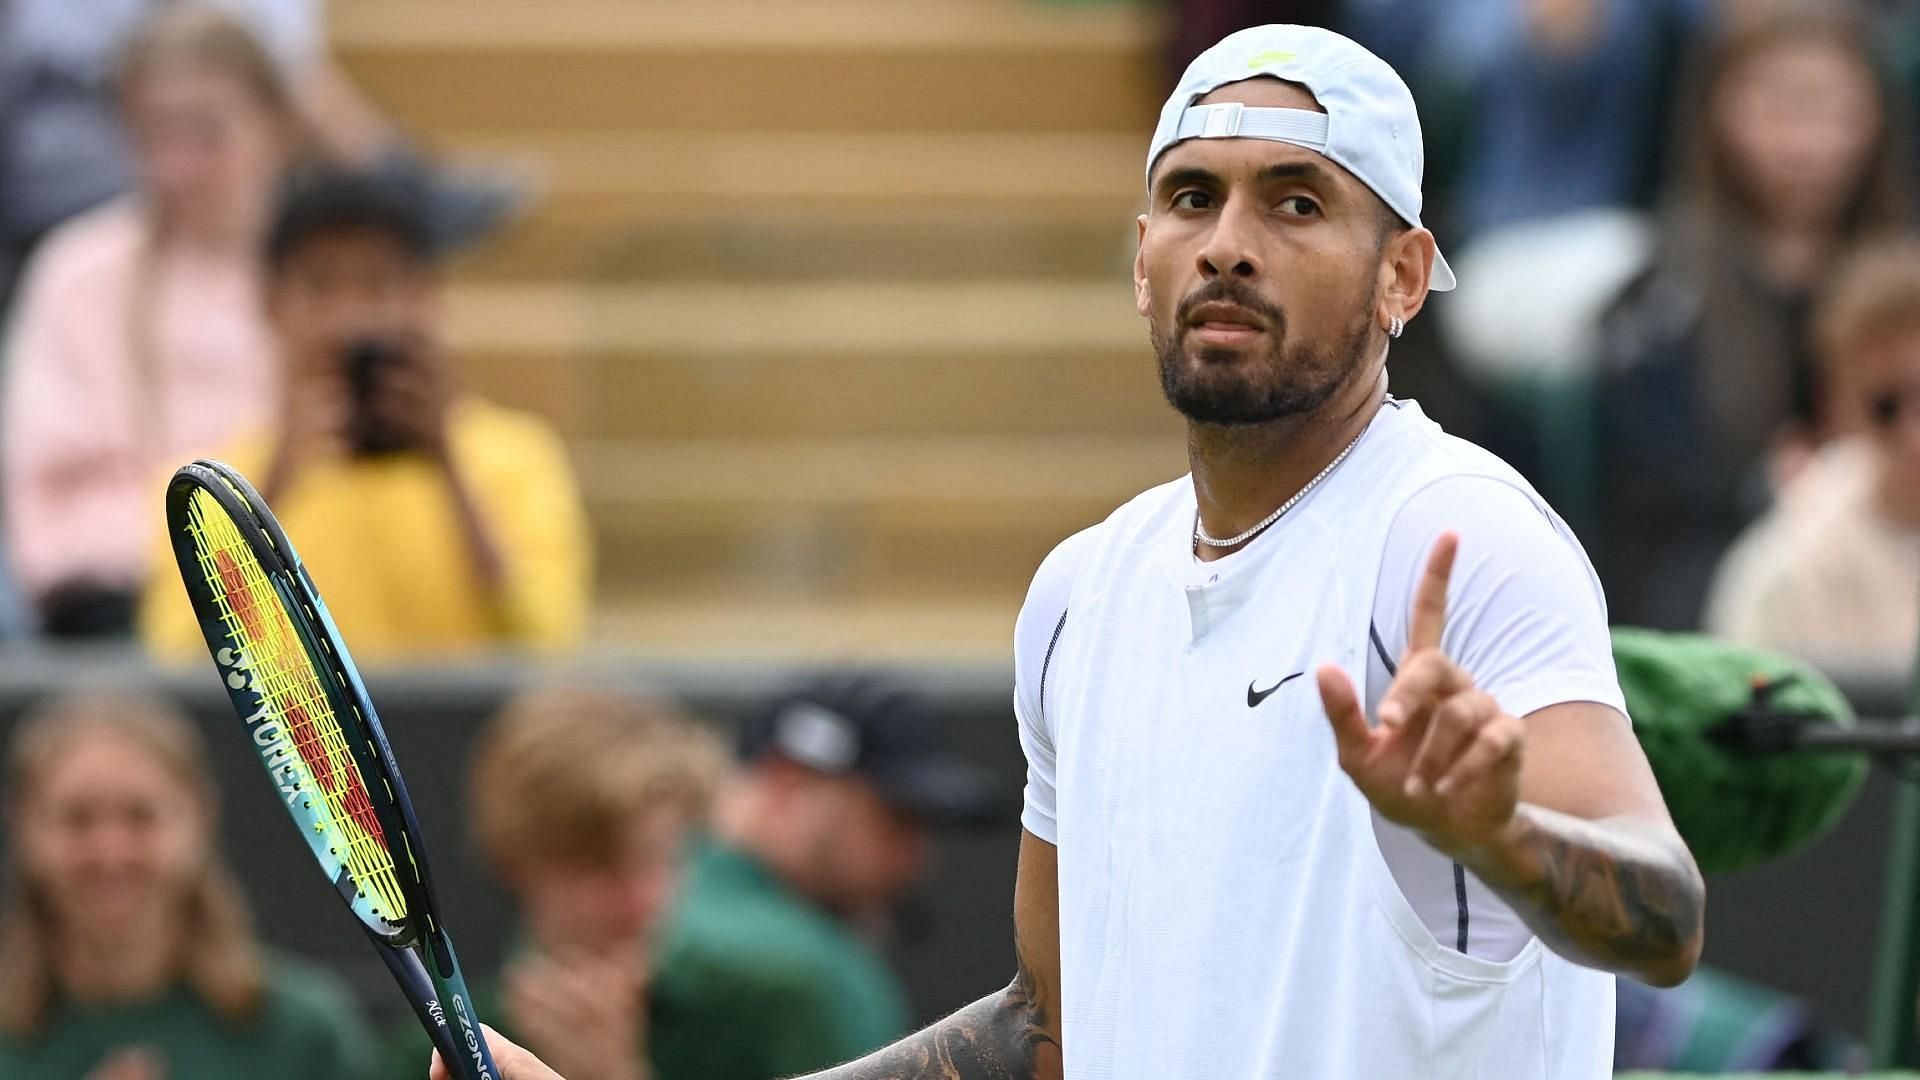 Kyrgios should be able to win quite a few easy points with his big serve and forehand